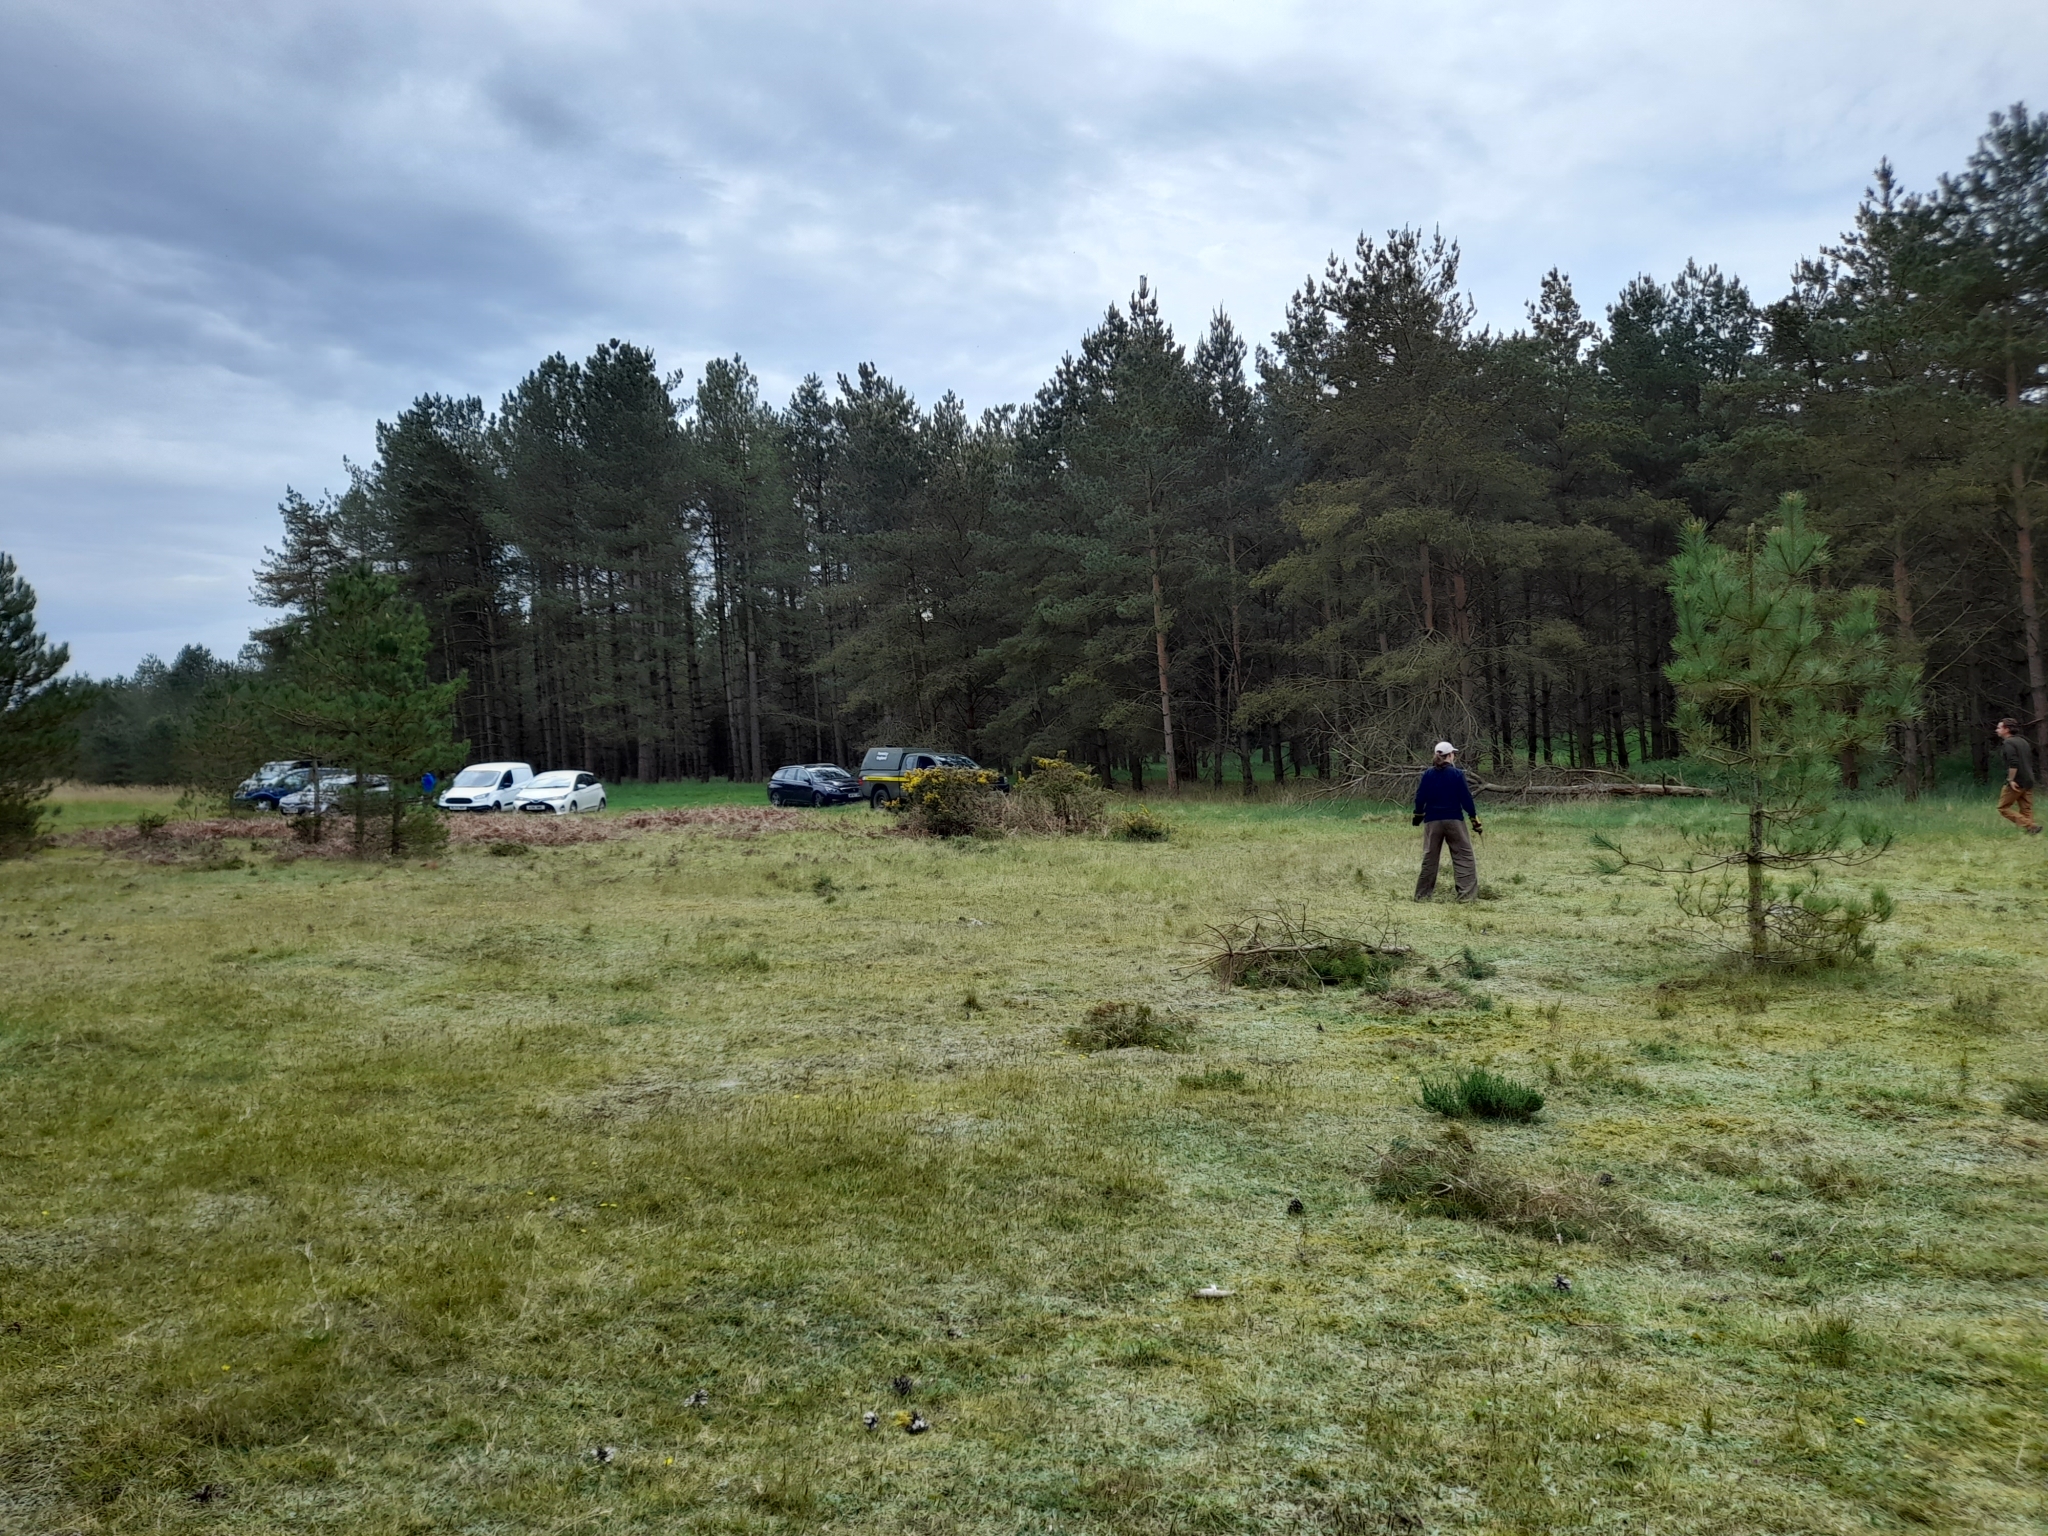 A photo from the FoTF Conservation Event - May 2022 - Self Sown Fir Removal at Kings Forest : A wide angle view of the work area, with volunteers working to remove self sown Firs in the background